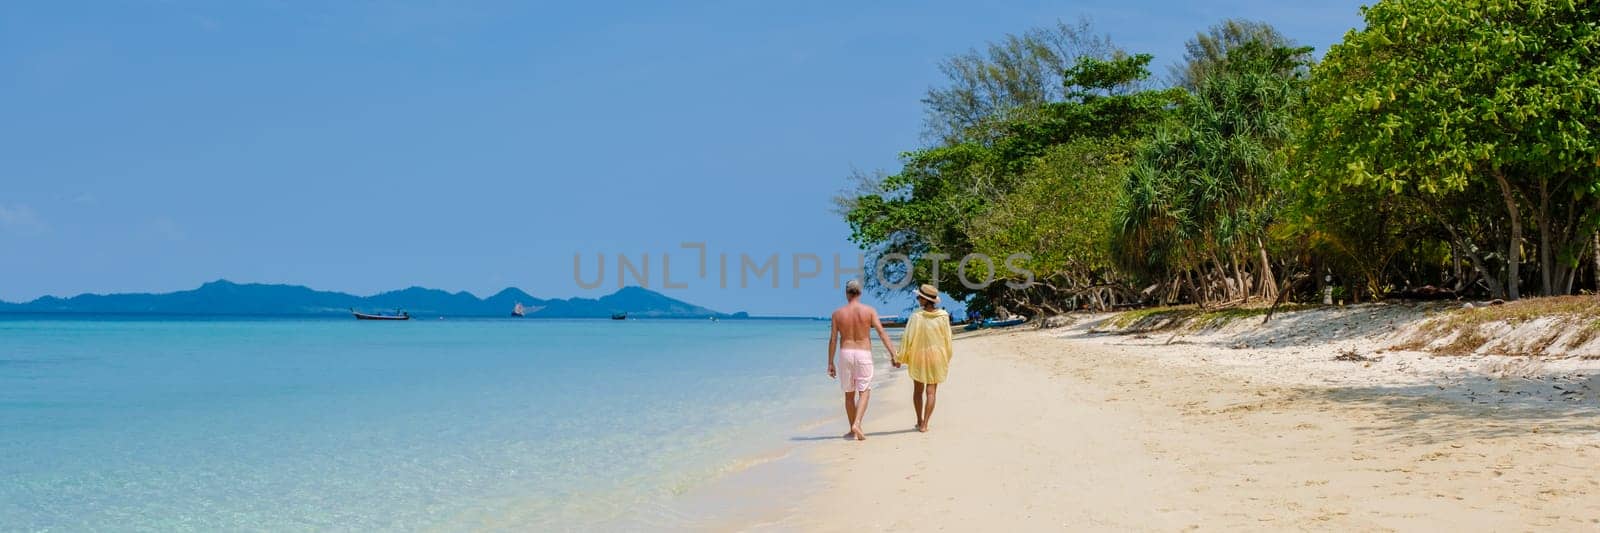 a couple of men and woman on the beach of Koh Kradan Island Thailand by fokkebok